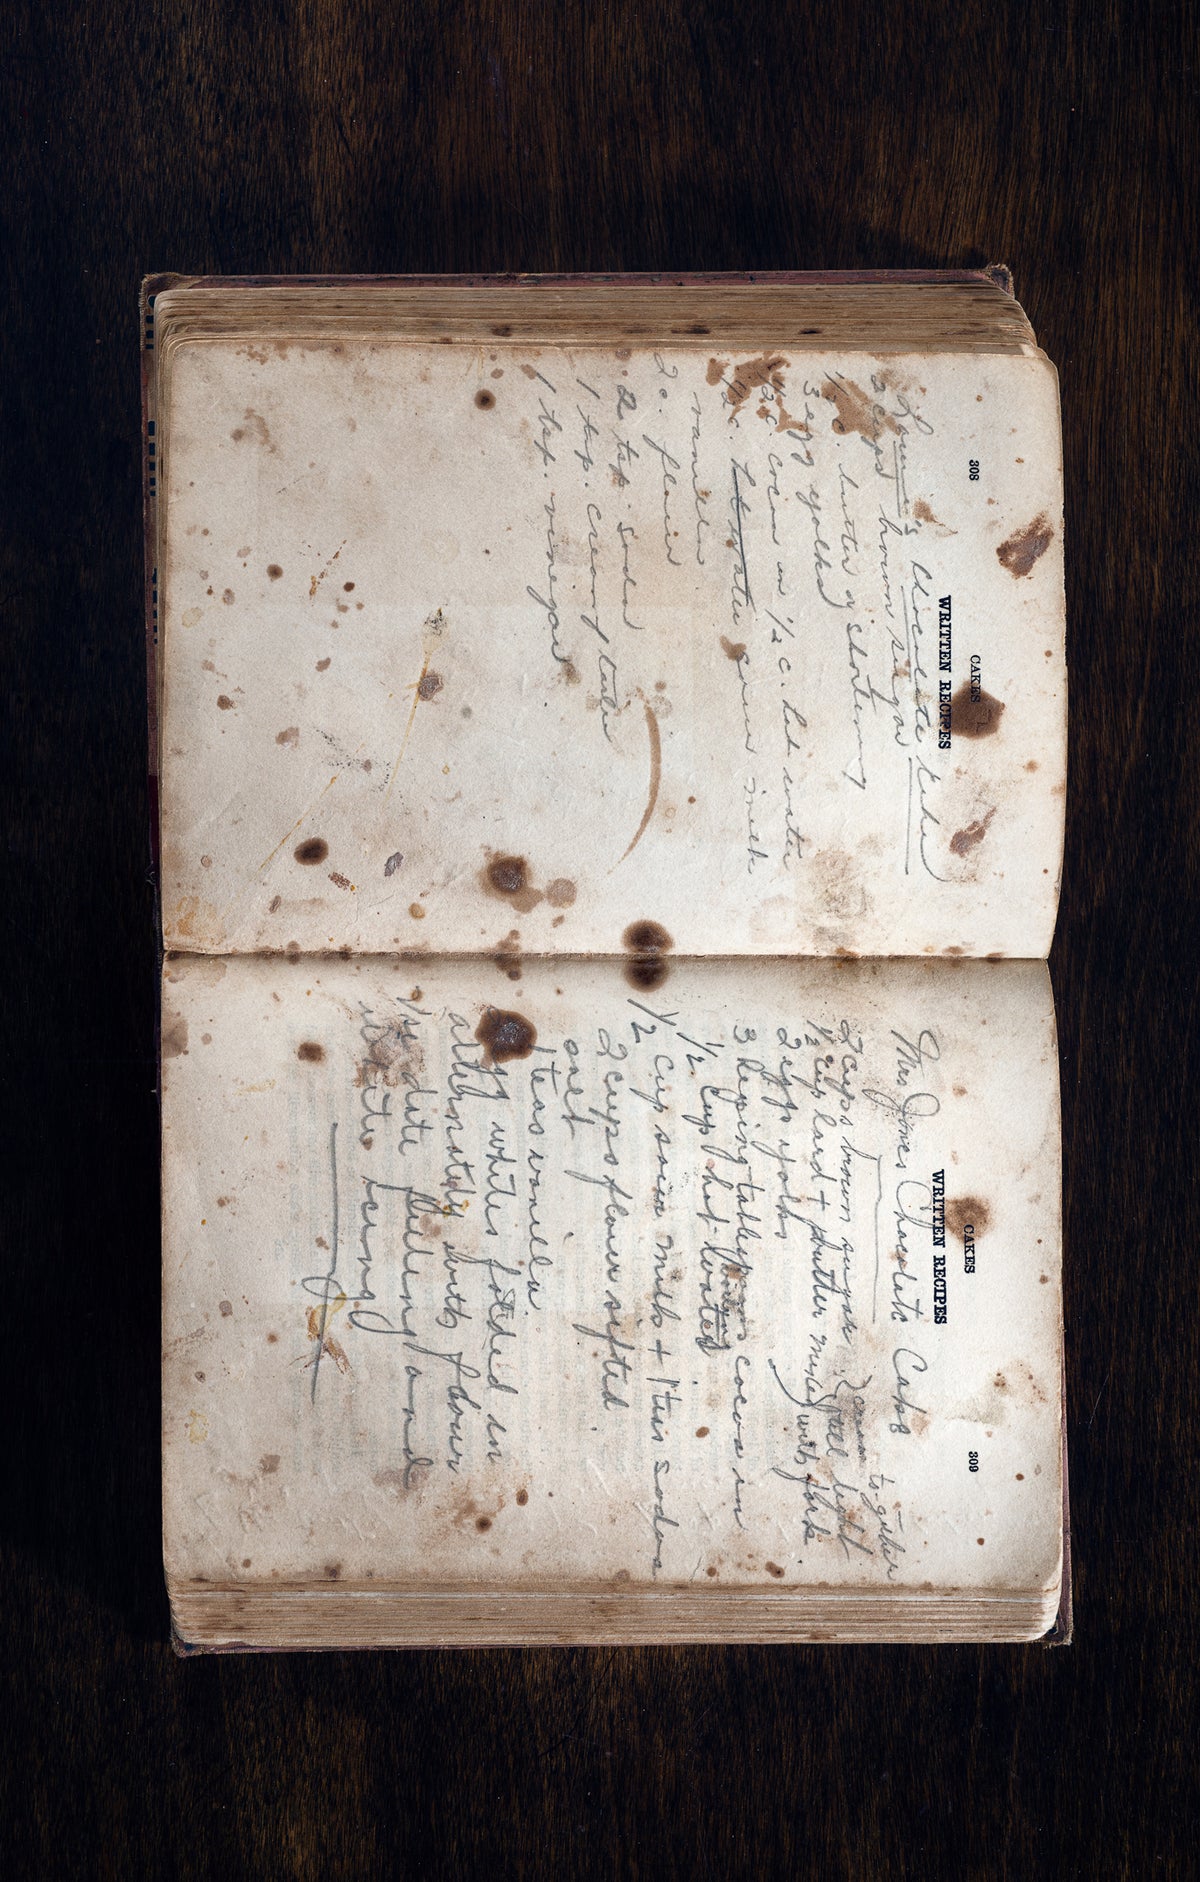 Handwritten Cookbook Lays Open To The Cake Section In A Wooden Surface